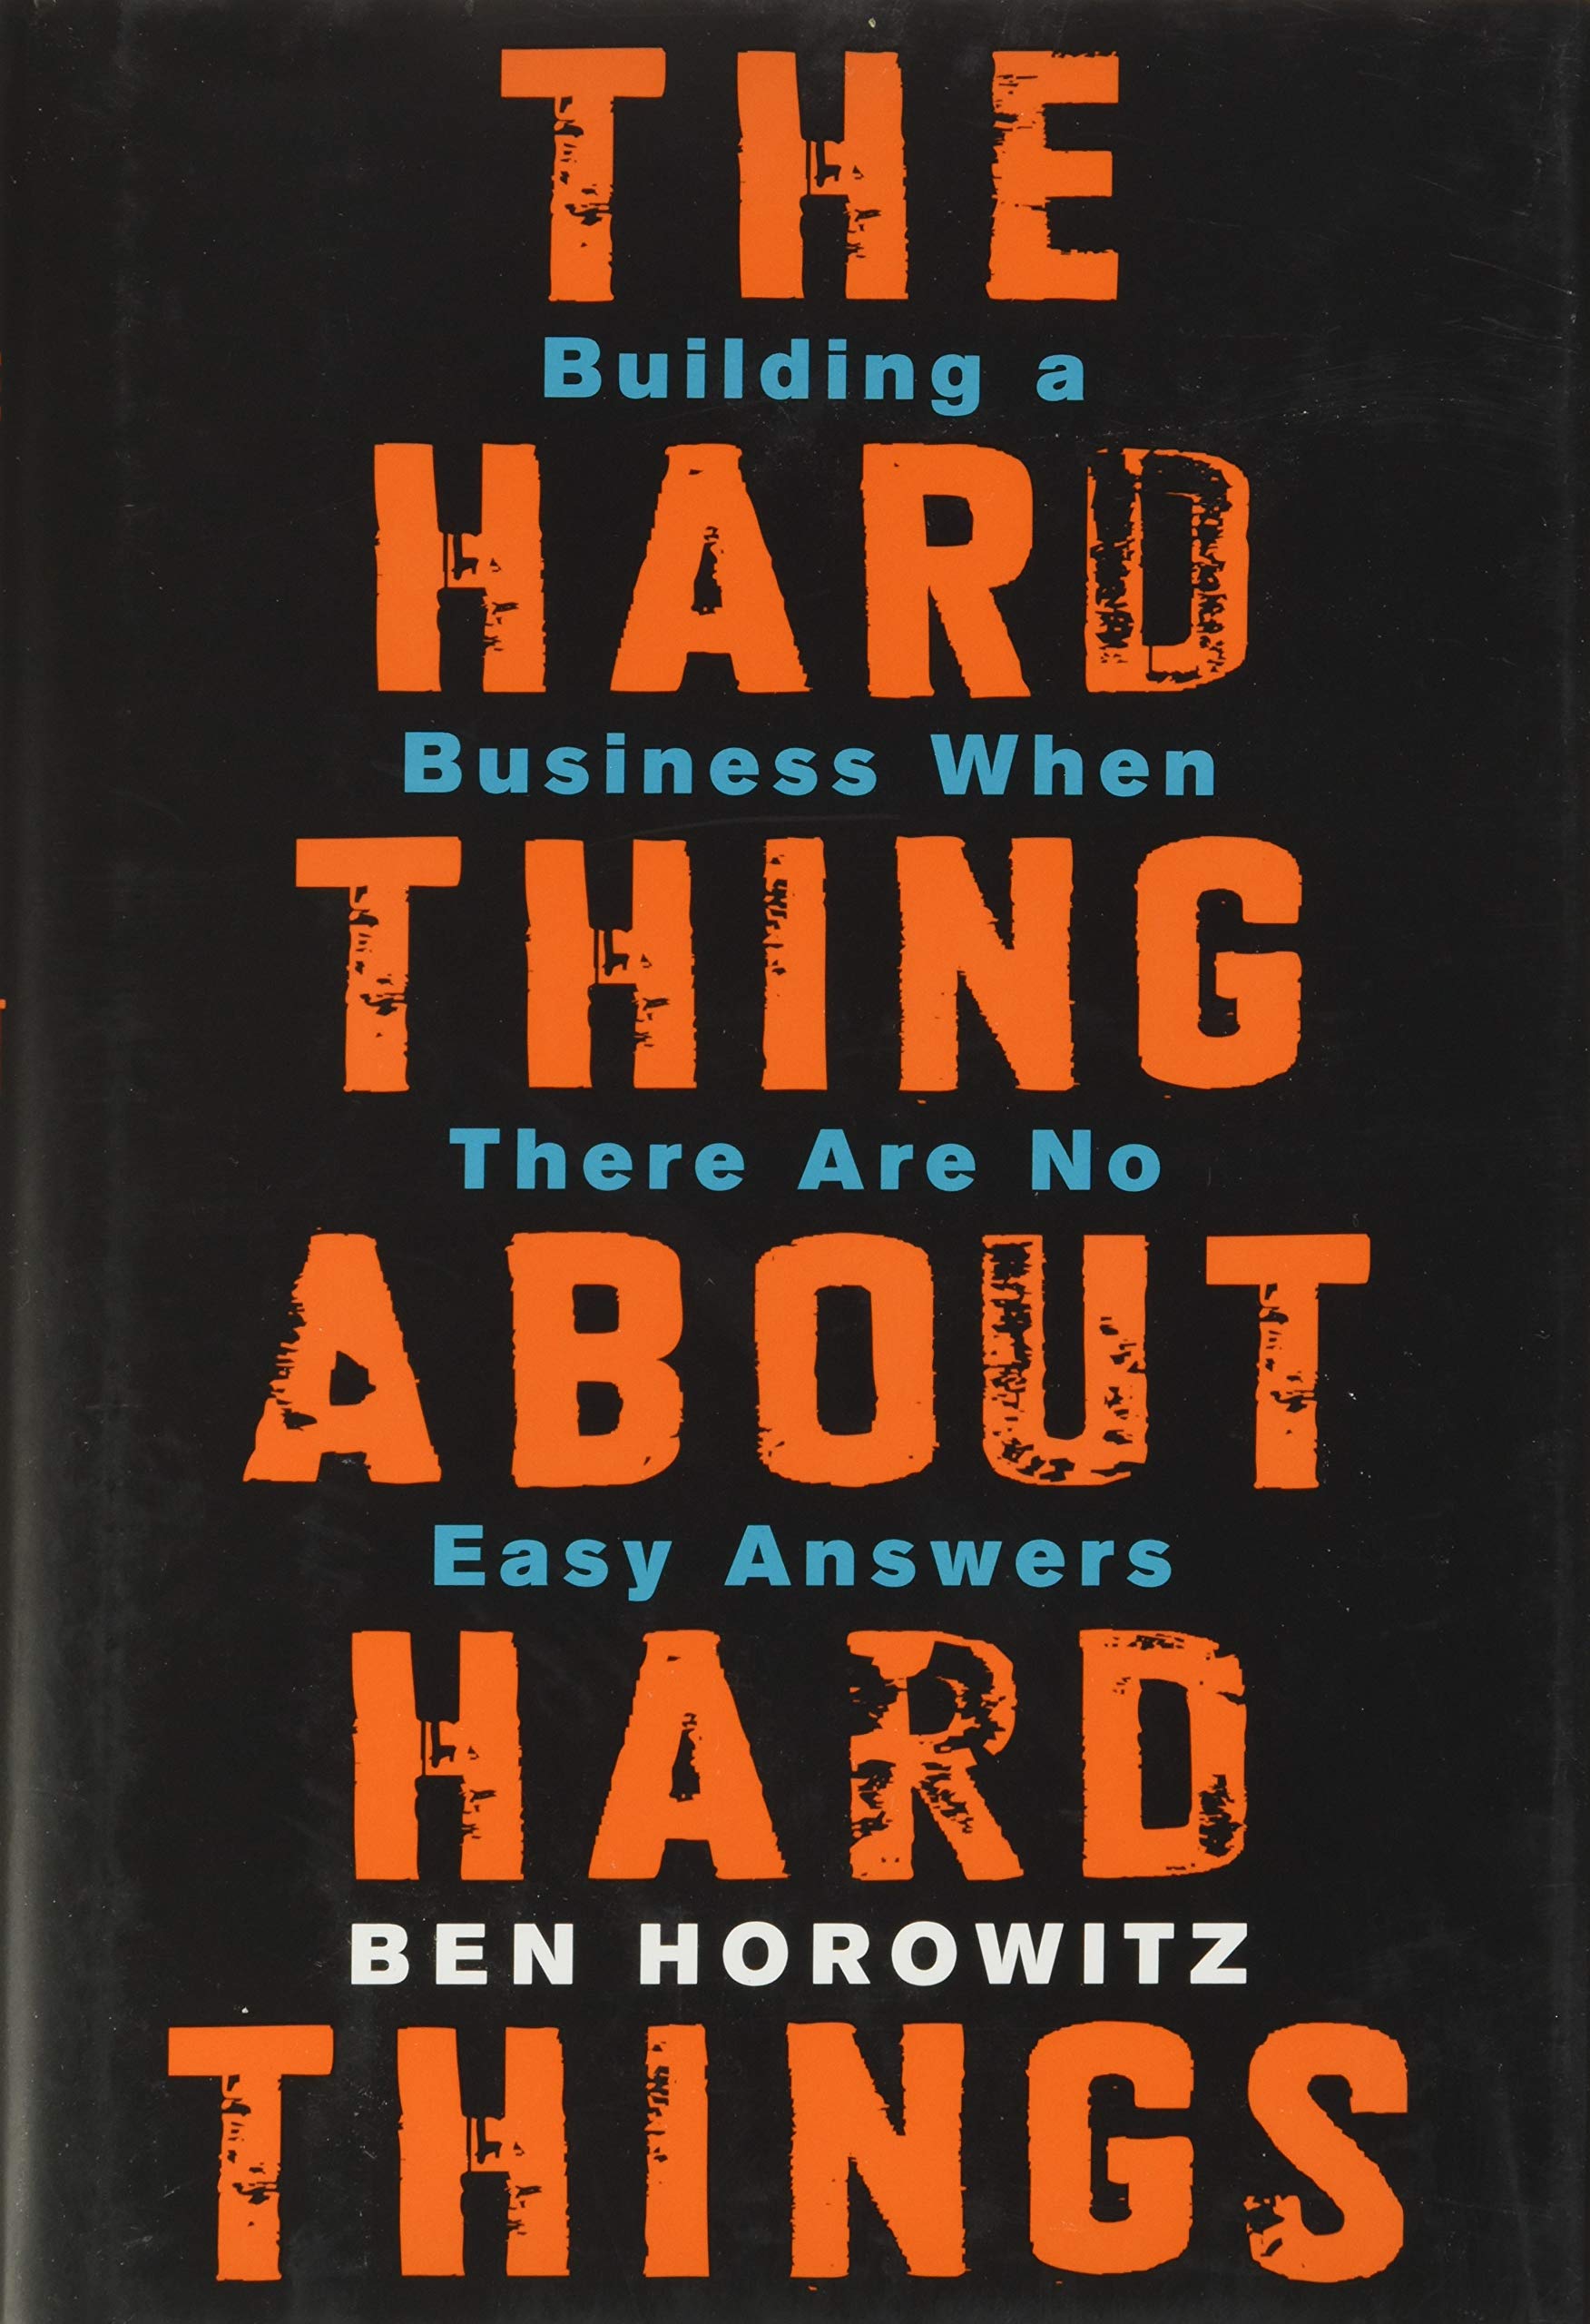 Hard thing about hard things, startup book on company building and the hard times